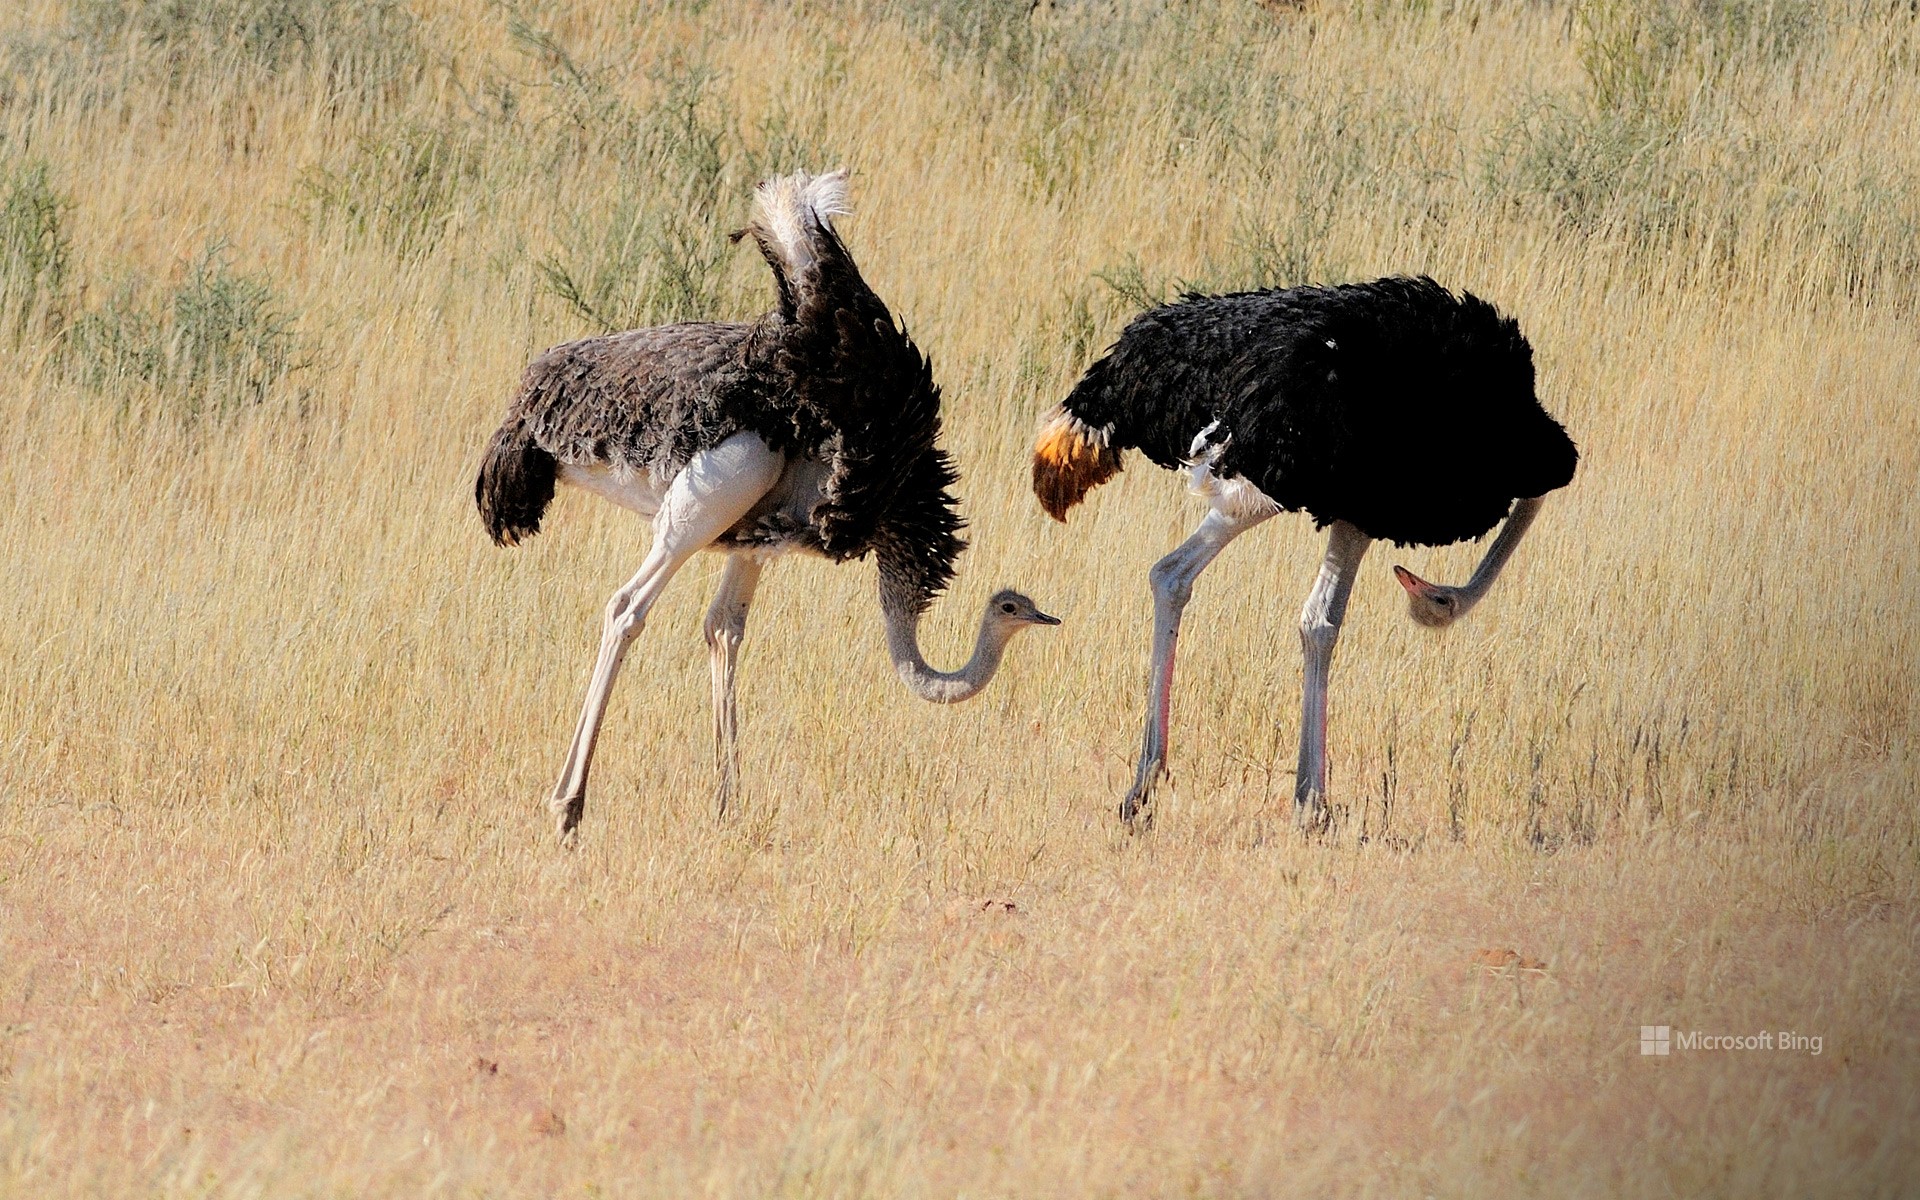 Ostriches in Kgalagadi Transfrontier Park, South Africa